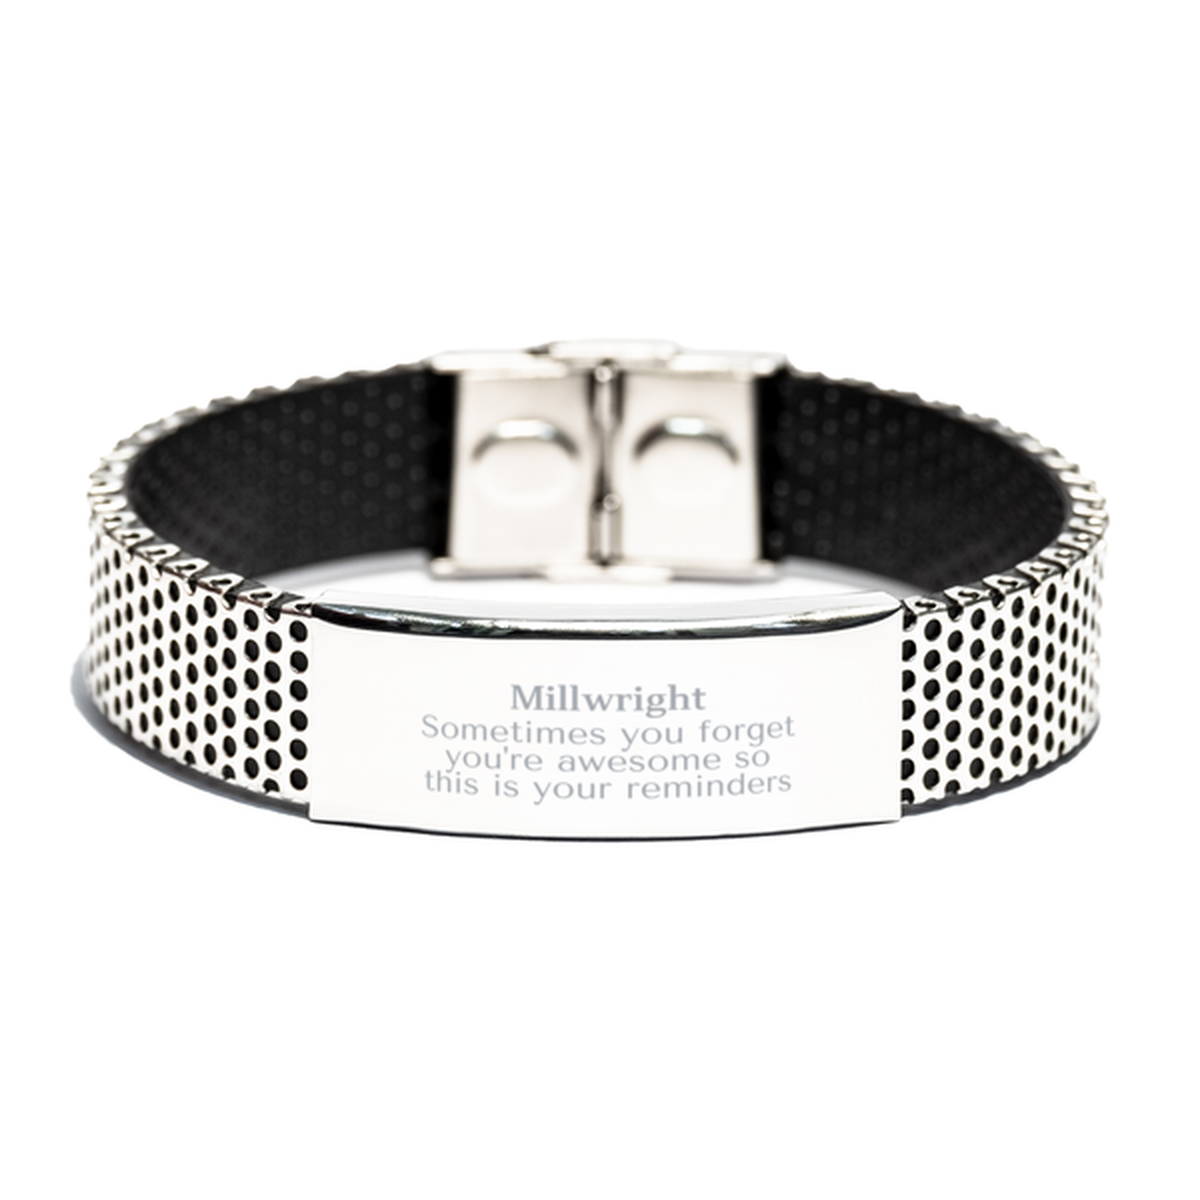 Sentimental Millwright Stainless Steel Bracelet, Millwright Sometimes you forget you're awesome so this is your reminders, Graduation Christmas Birthday Gifts for Millwright, Men, Women, Coworkers